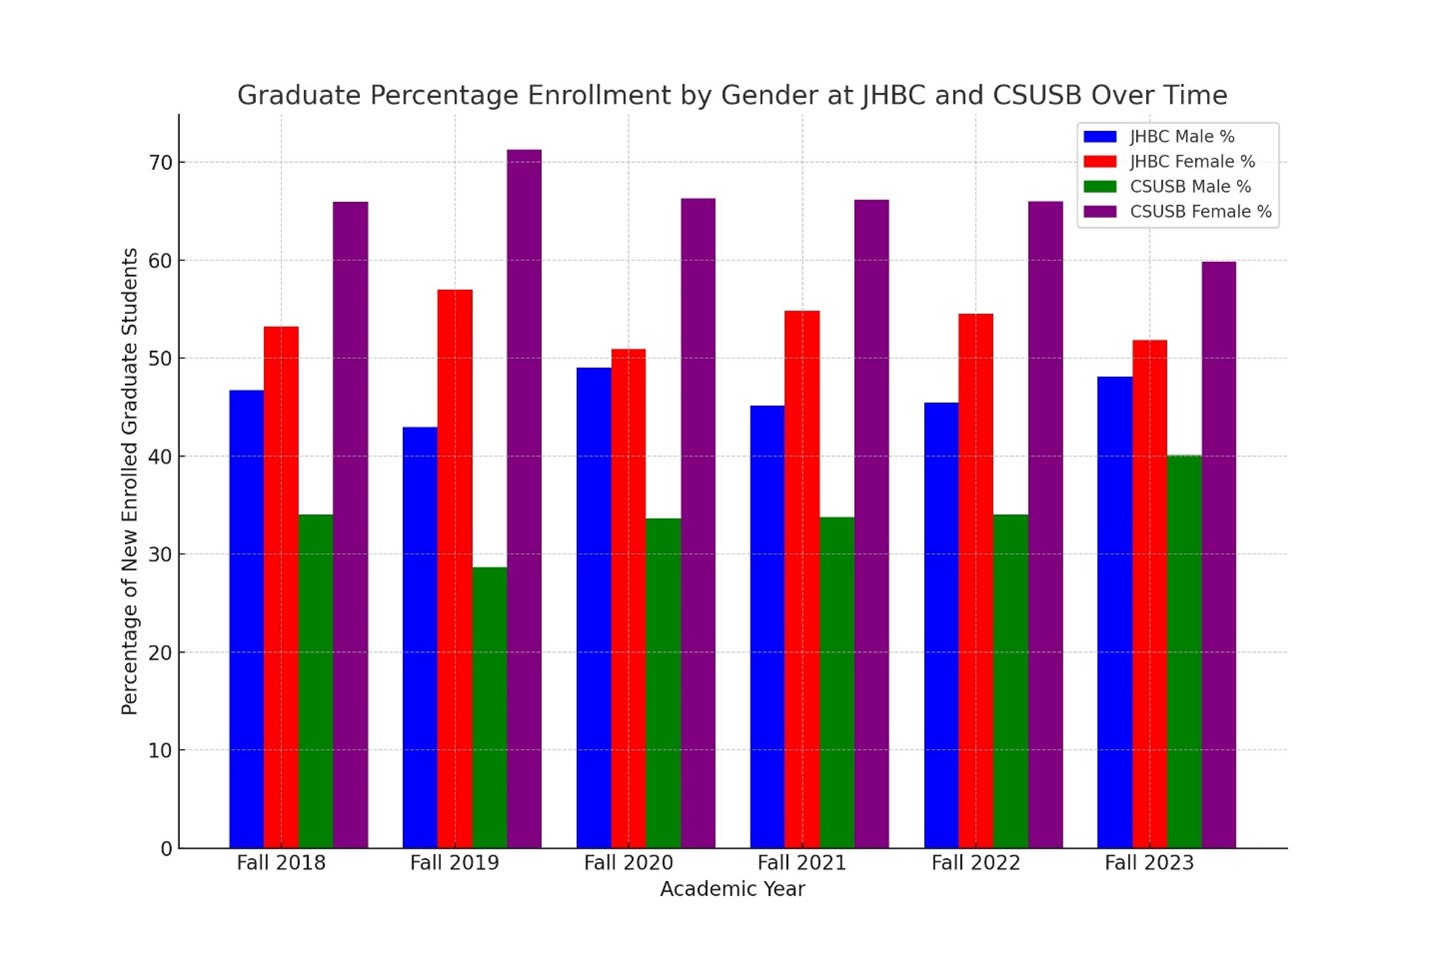 Graduate Percentage Enrollment by Gender at JHBC and CSUSB Over Time